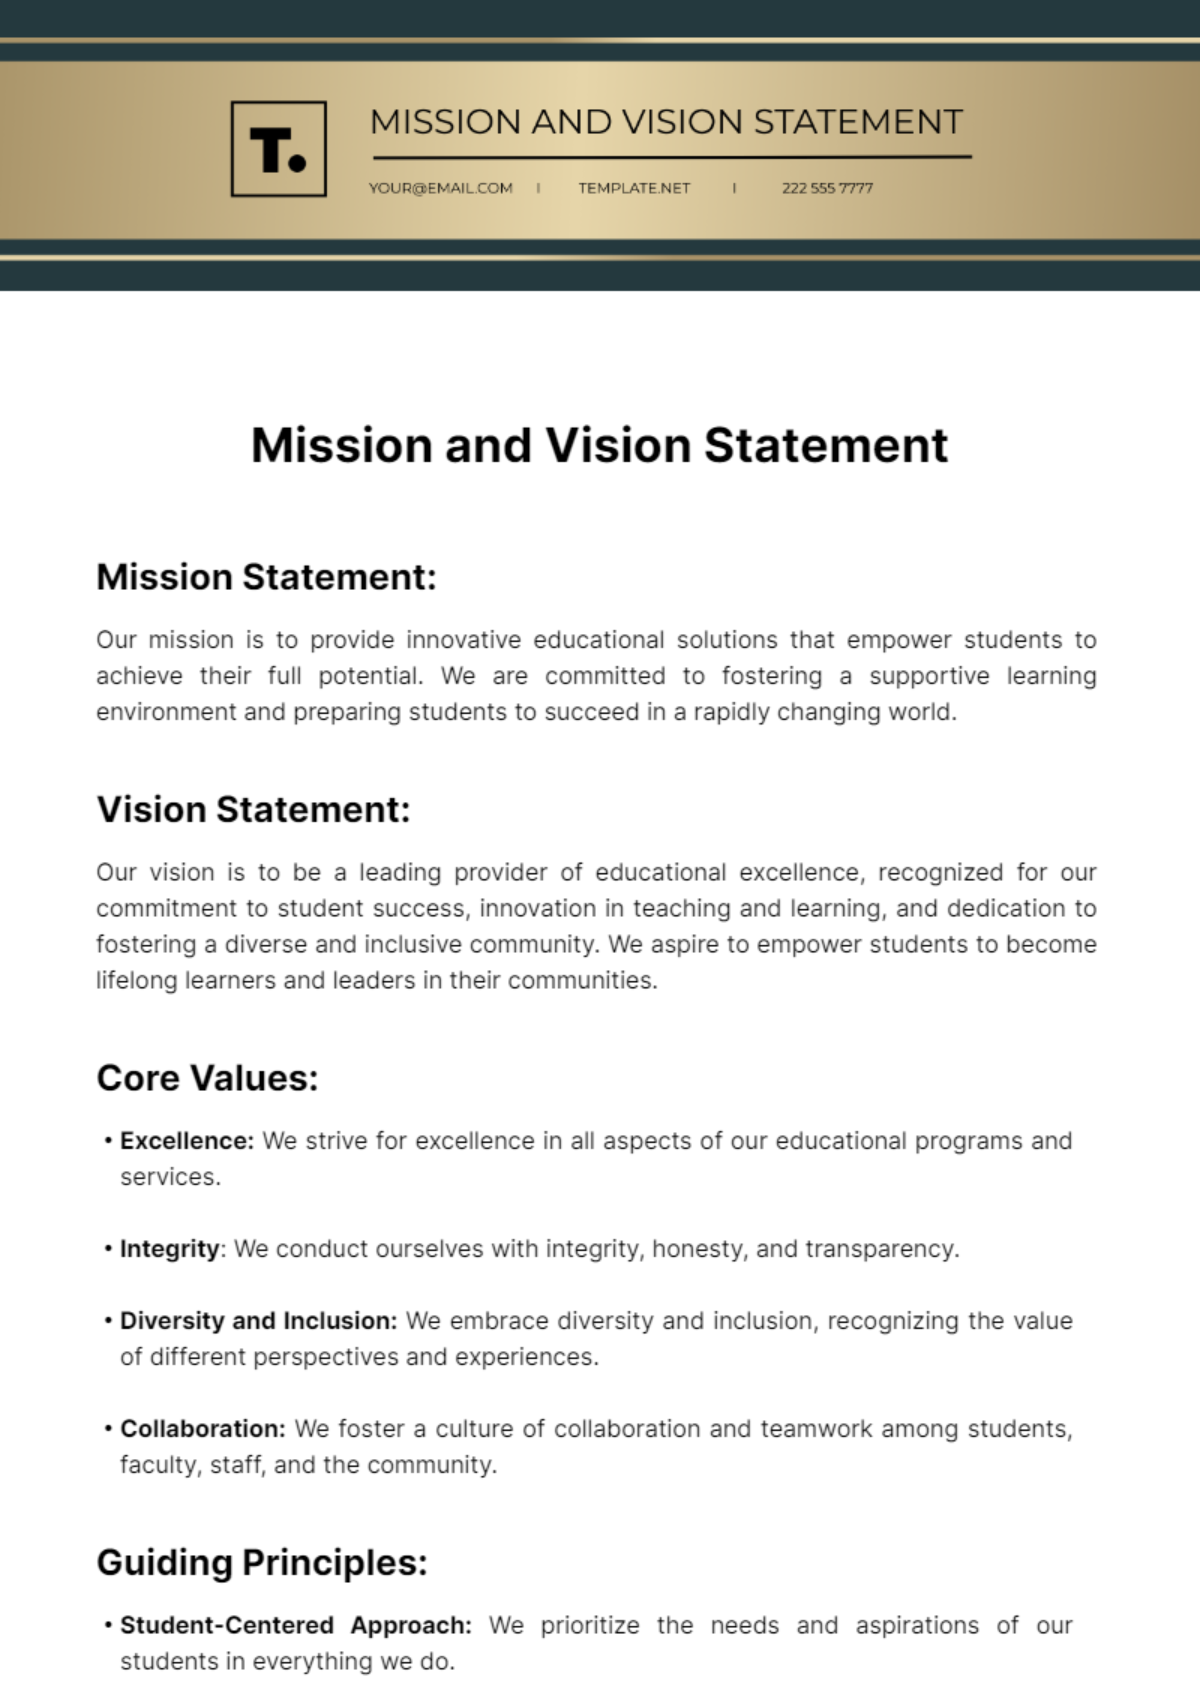 Mission and Vision Statement Template